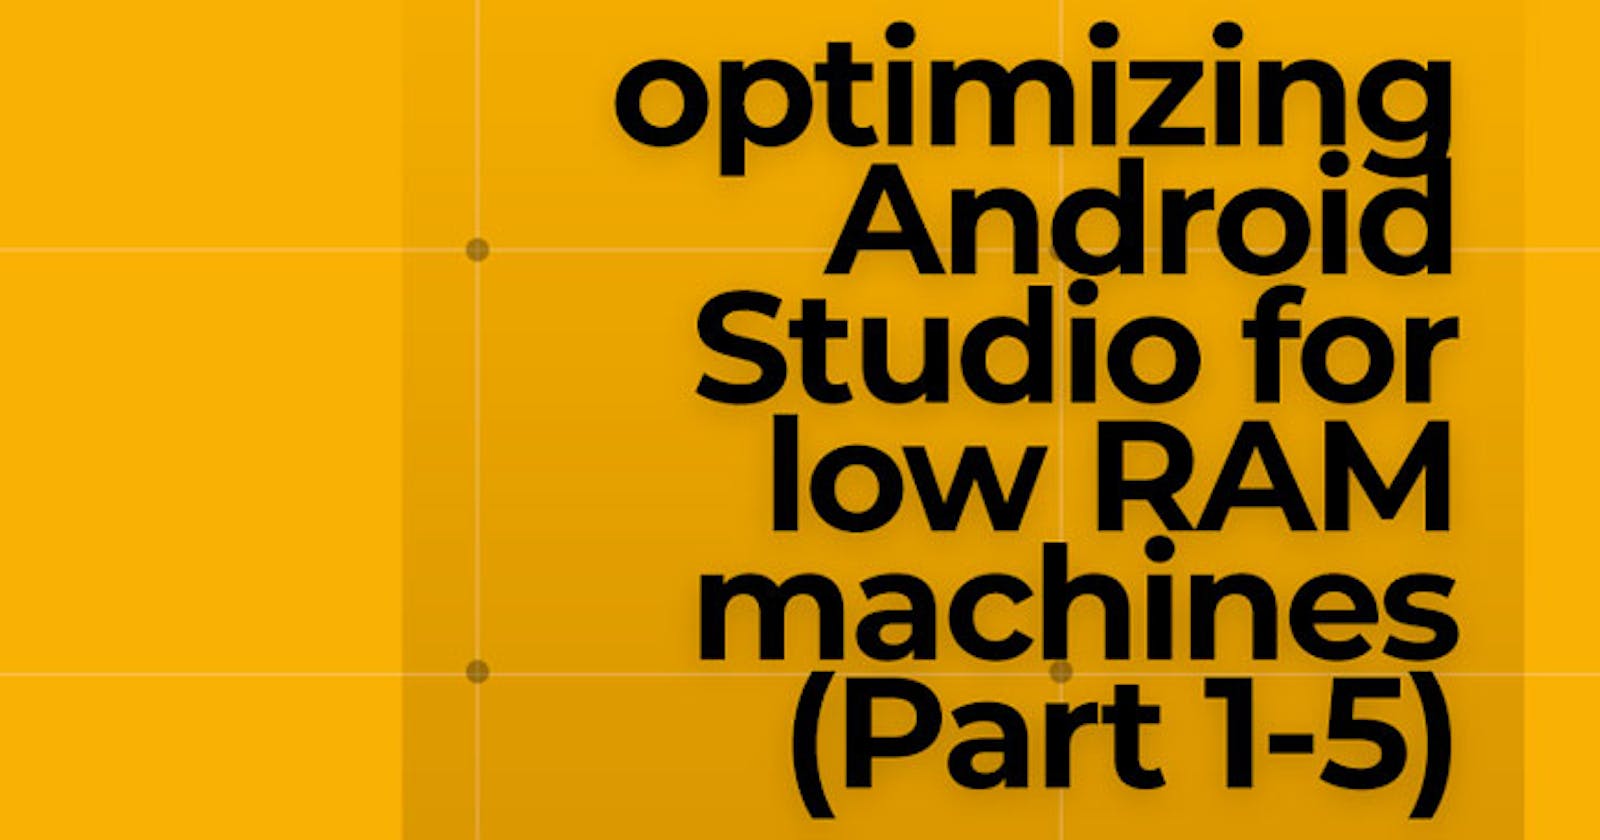 optimizing Android Studio for low RAMed machines (part one: 1-5)